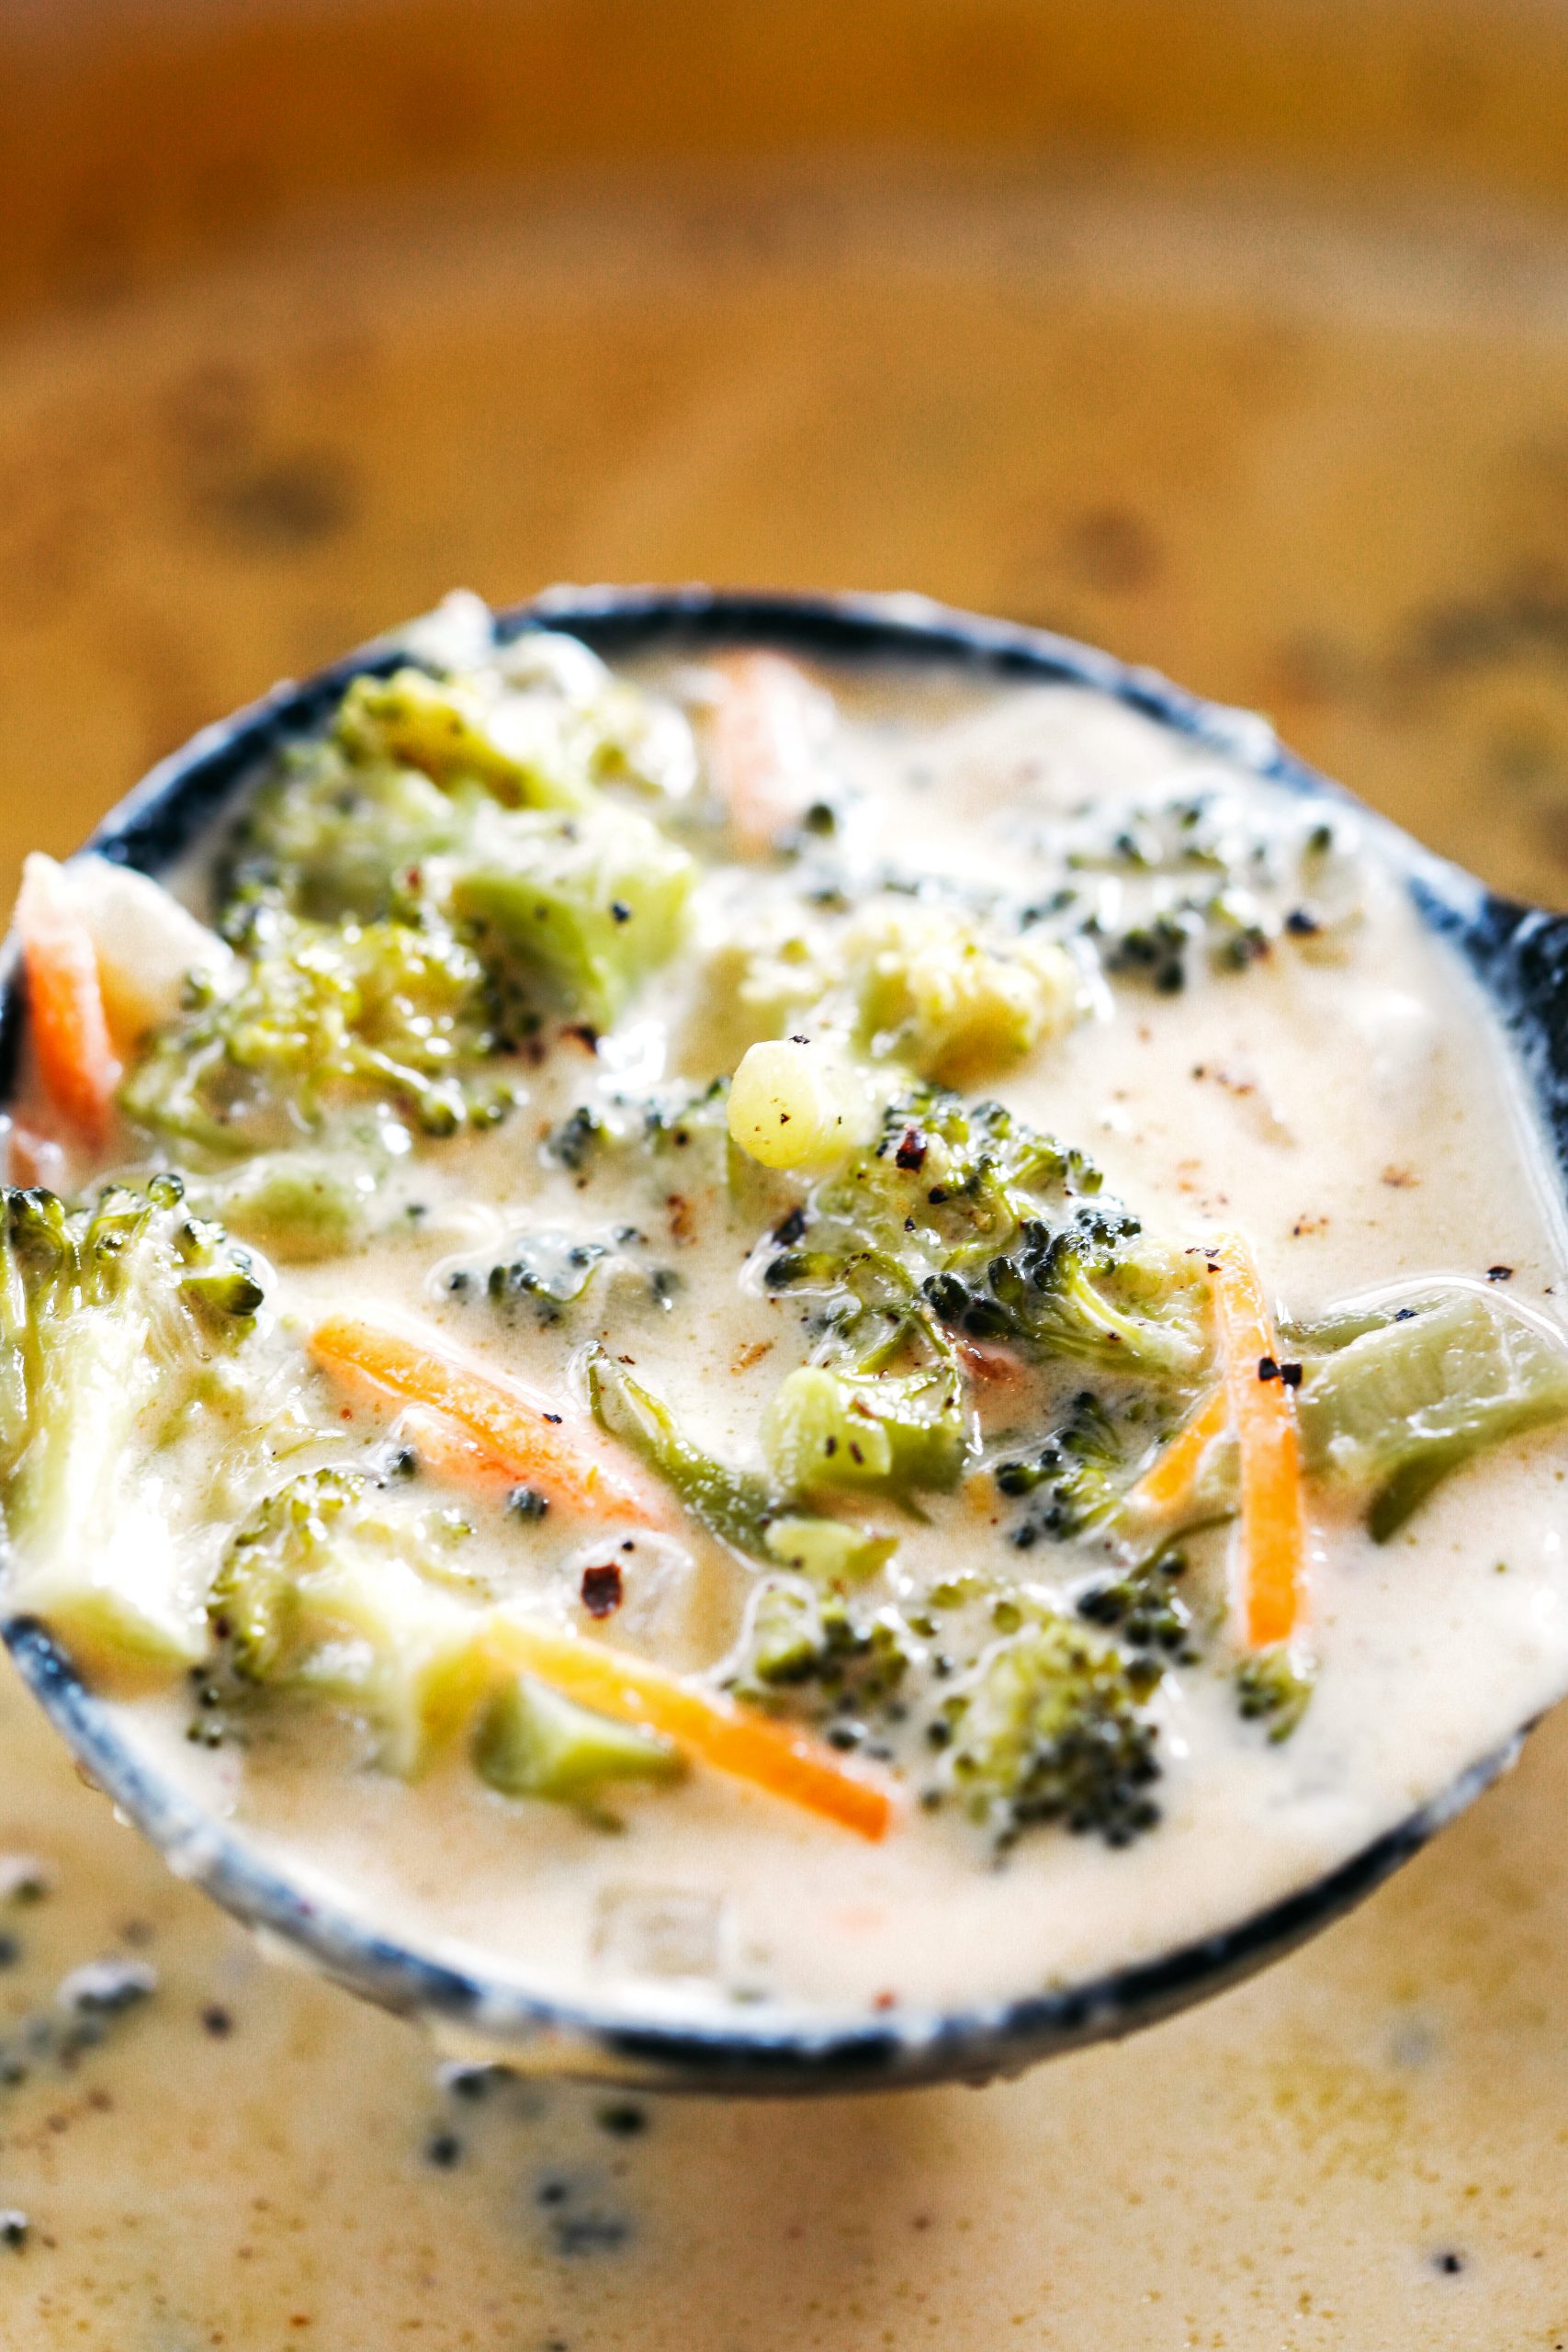 This Creamy Broccoli Cheddar Soup makes the perfect low carb comfort dish that is delicious, packed with veggies and made all in one pot in under 30 minutes!